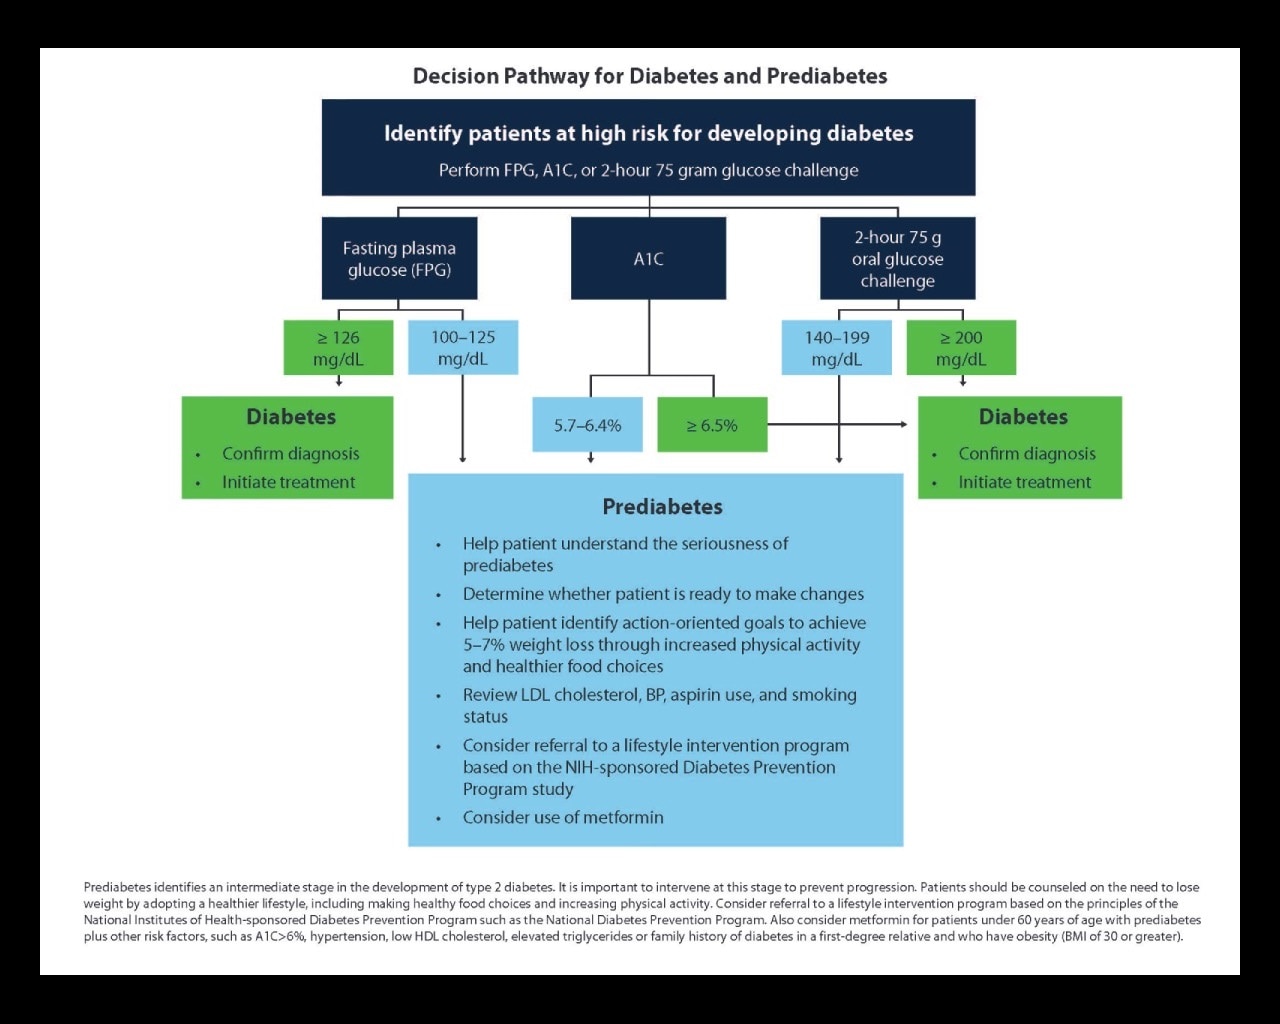 Diagram of the decision pathway for Diabetes and Prediabetes